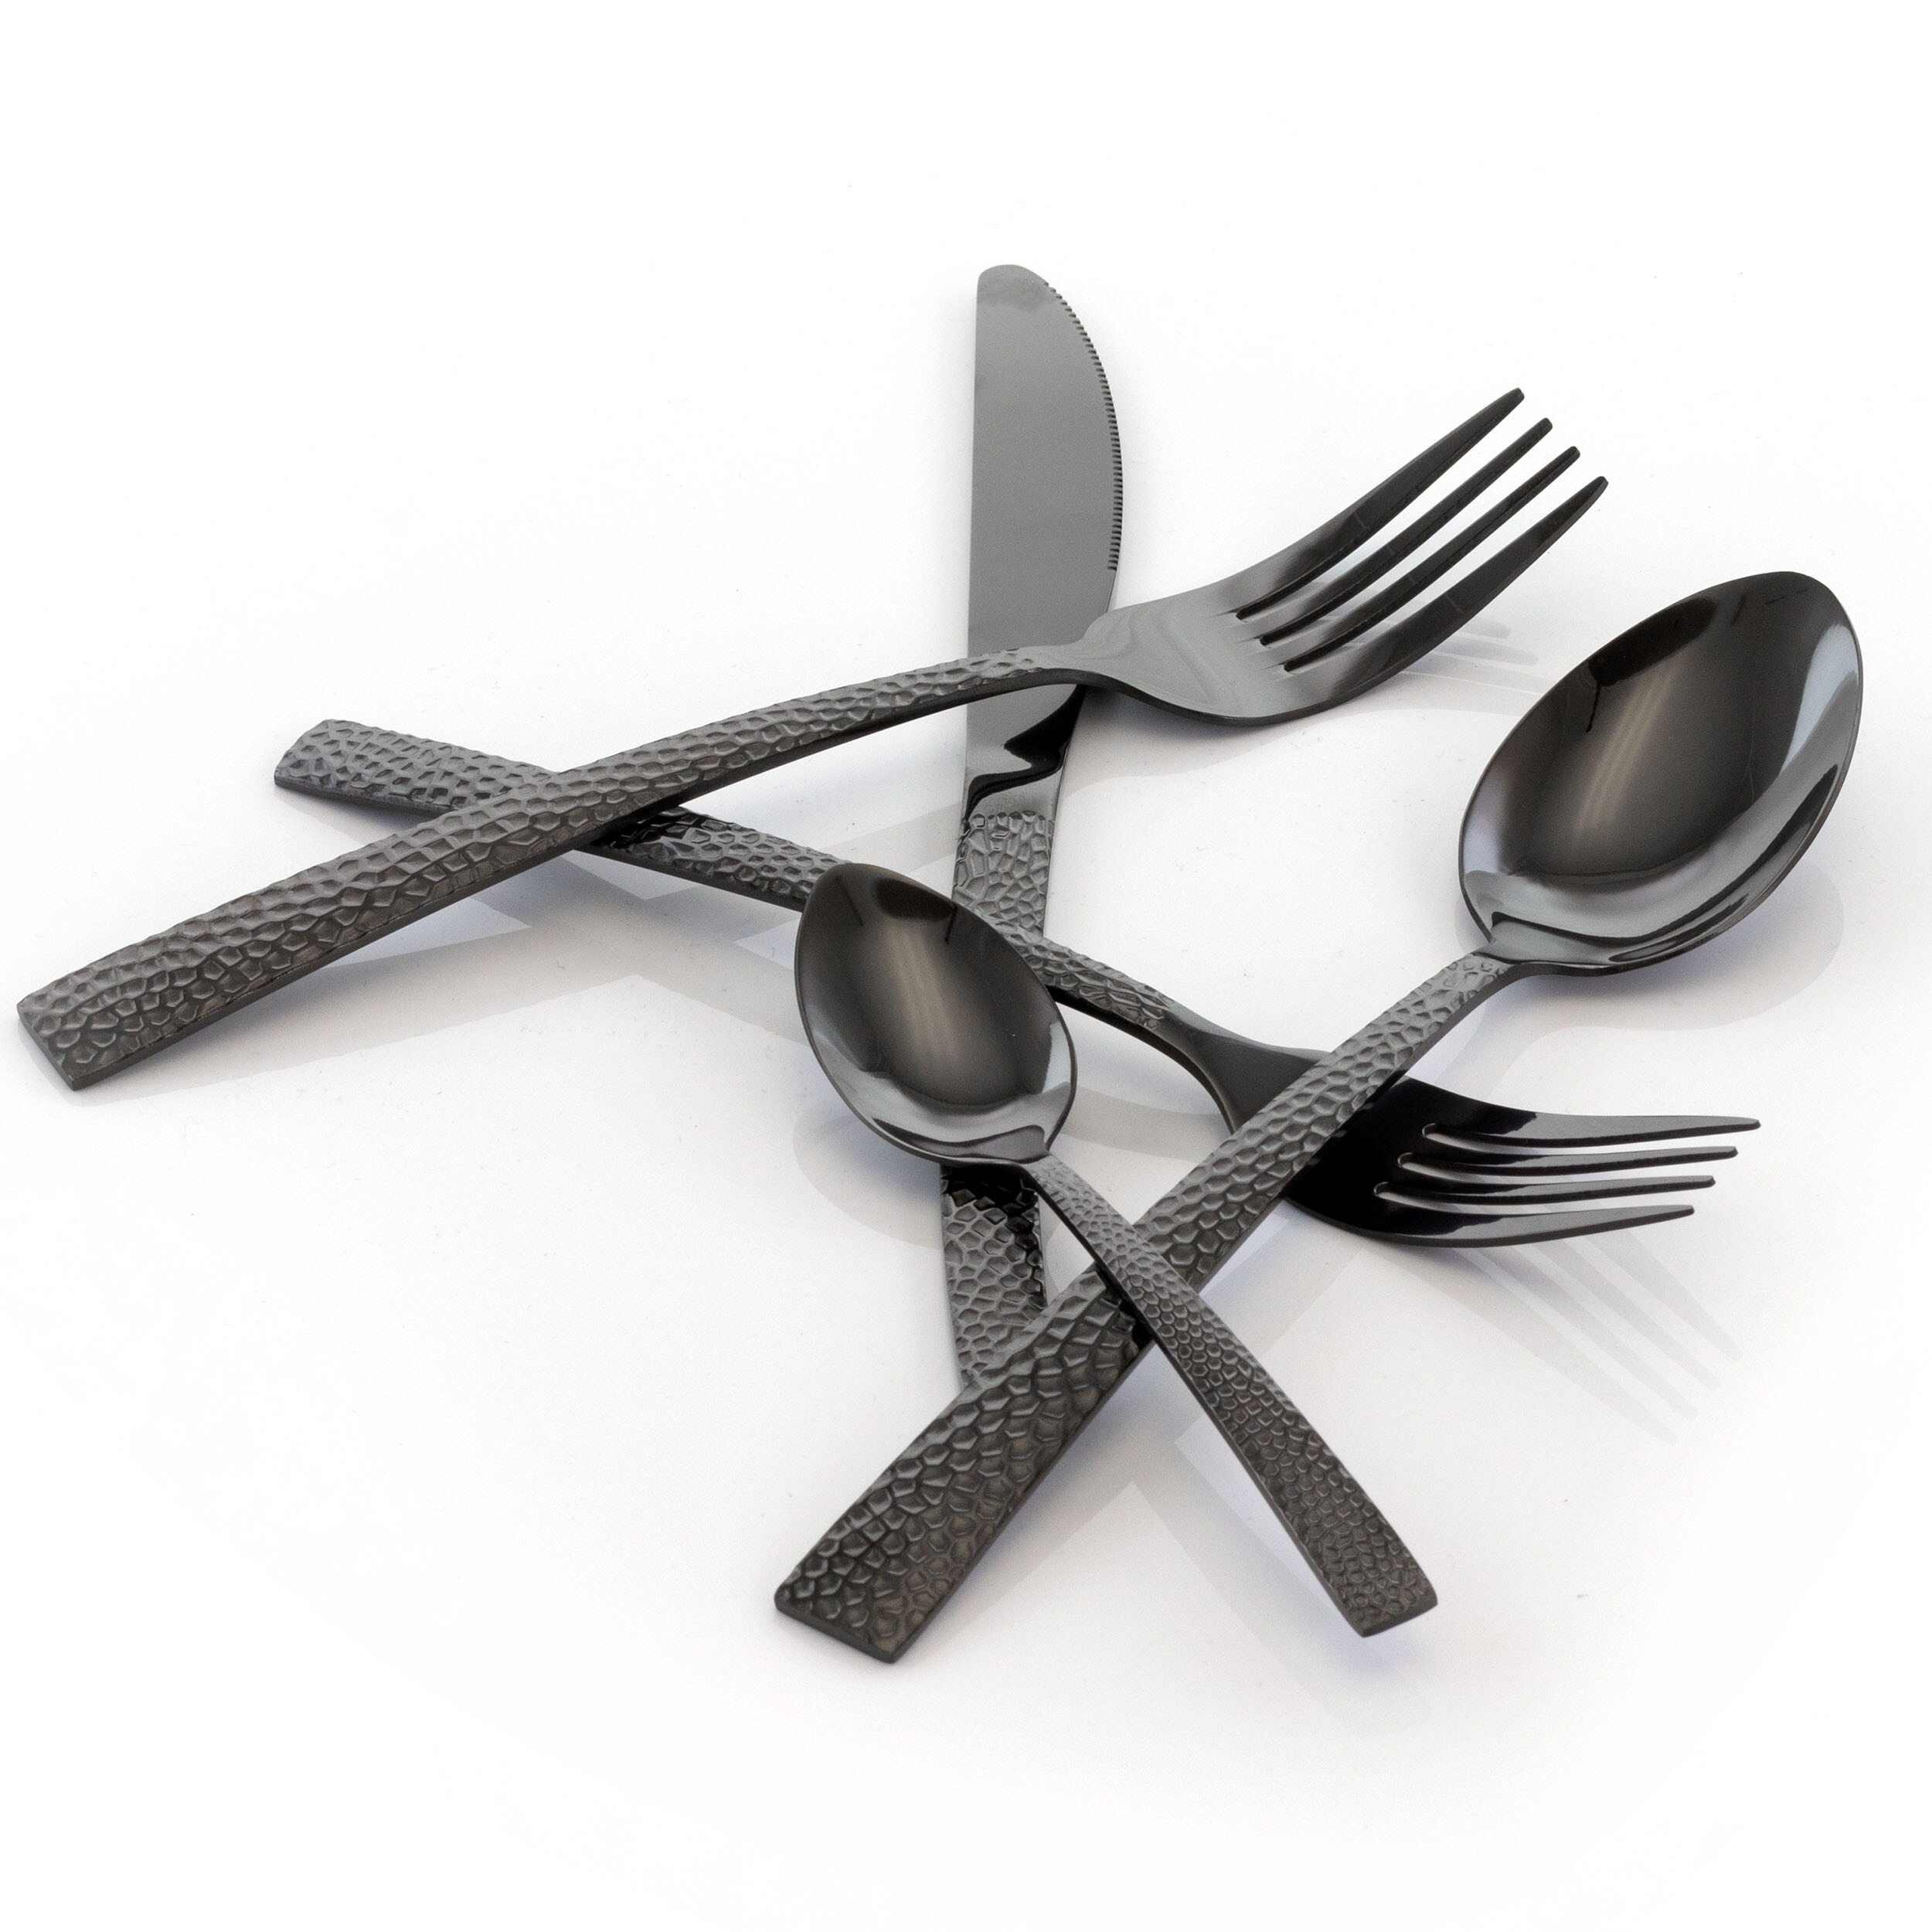 https://ak1.ostkcdn.com/images/products/is/images/direct/9b4144676c7ee2249c4377f85e818bf7f24c690c/MegaChef-Baily-20-Piece-Flatware-Utensil-Set%2C-Stainless-Steel-Silverware-Metal-Service-for-4-in-Black.jpg